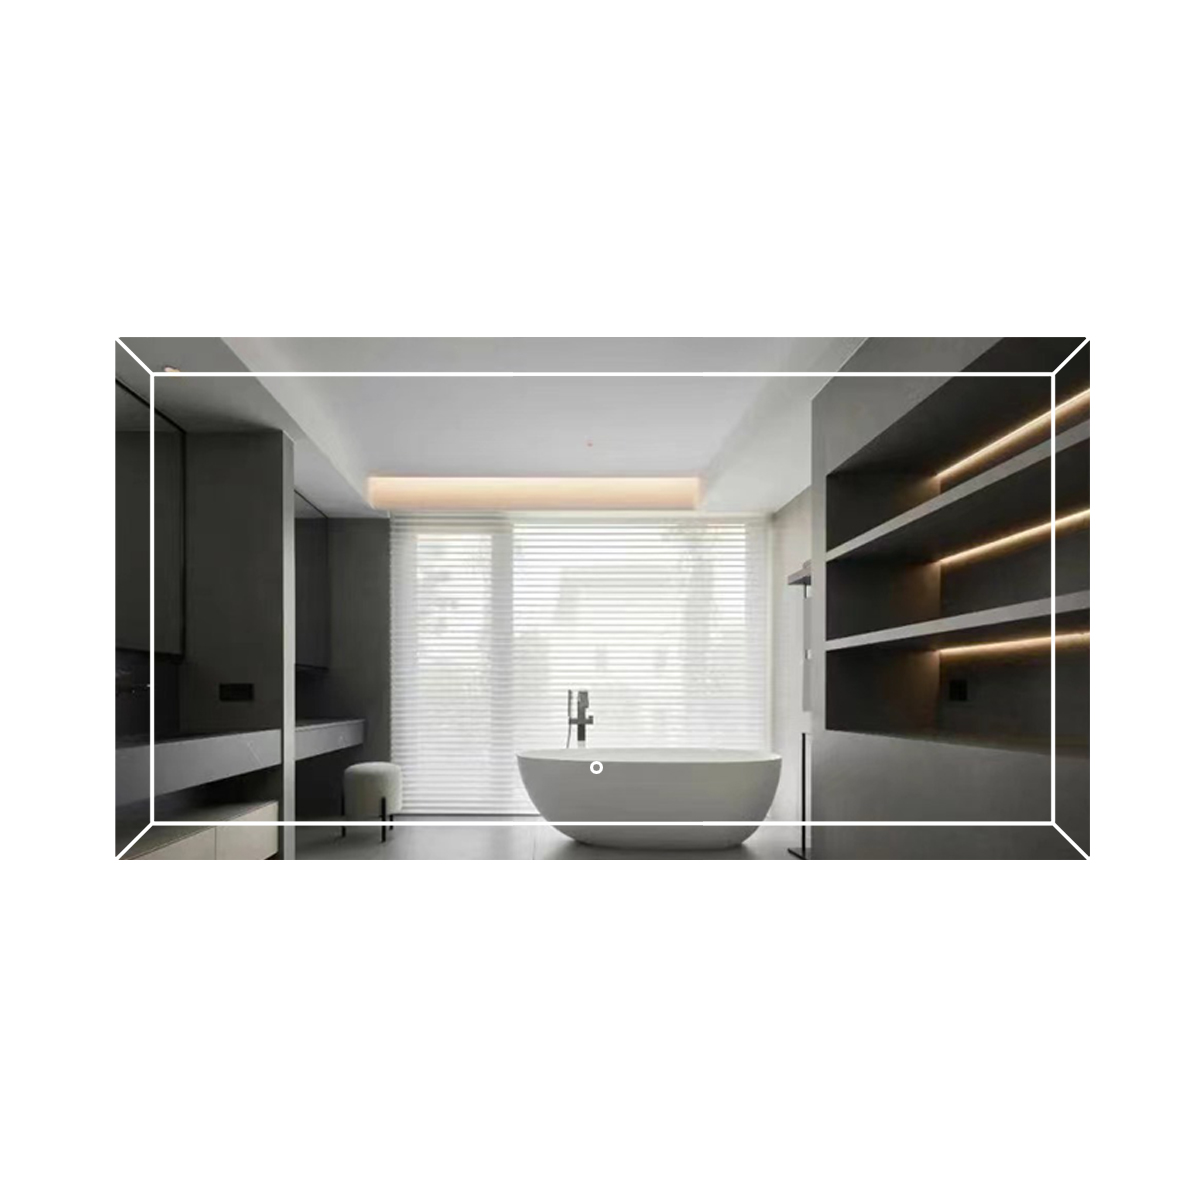 Duko MA015530T Wall Mounted Makeup LED Bathroom Vanity Mirror with Anti-Fog and Bluetooth Options